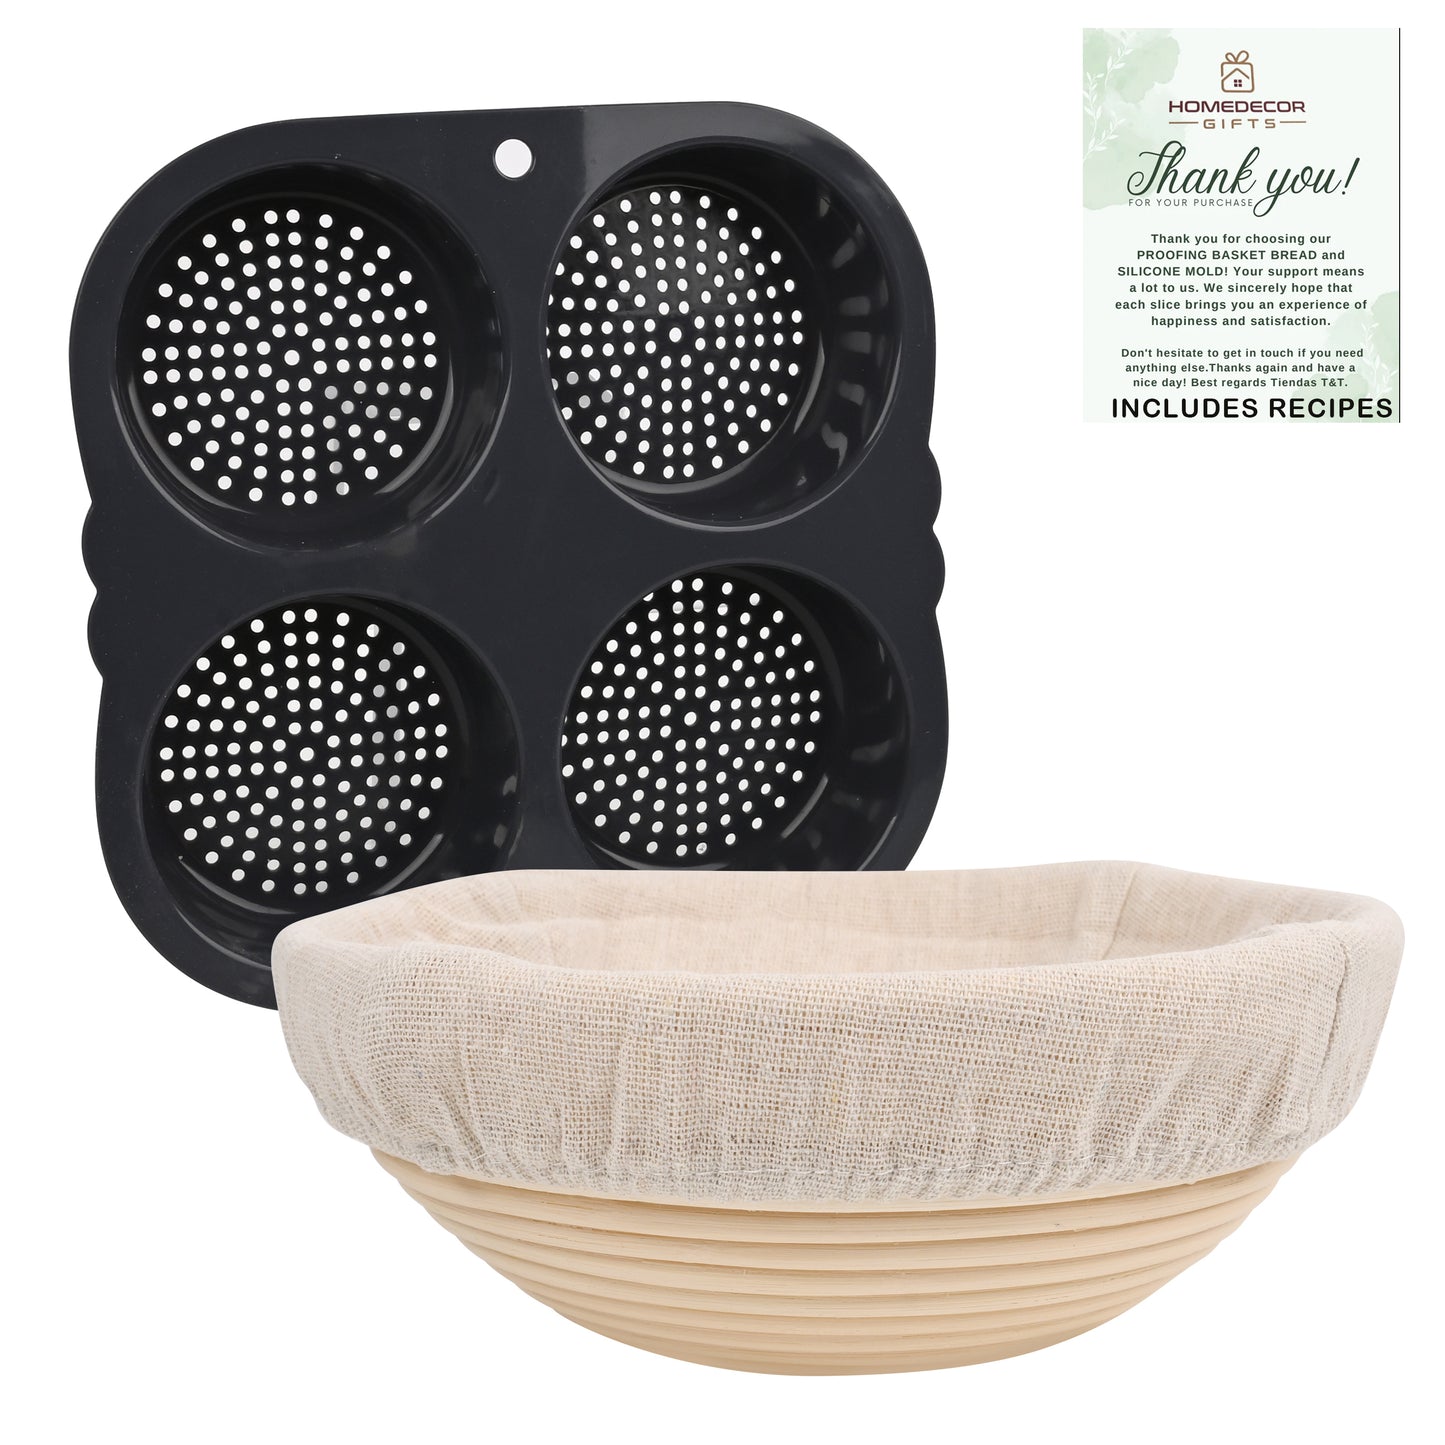 BREAD PROOFING BASKET WITH BURGER MOLD